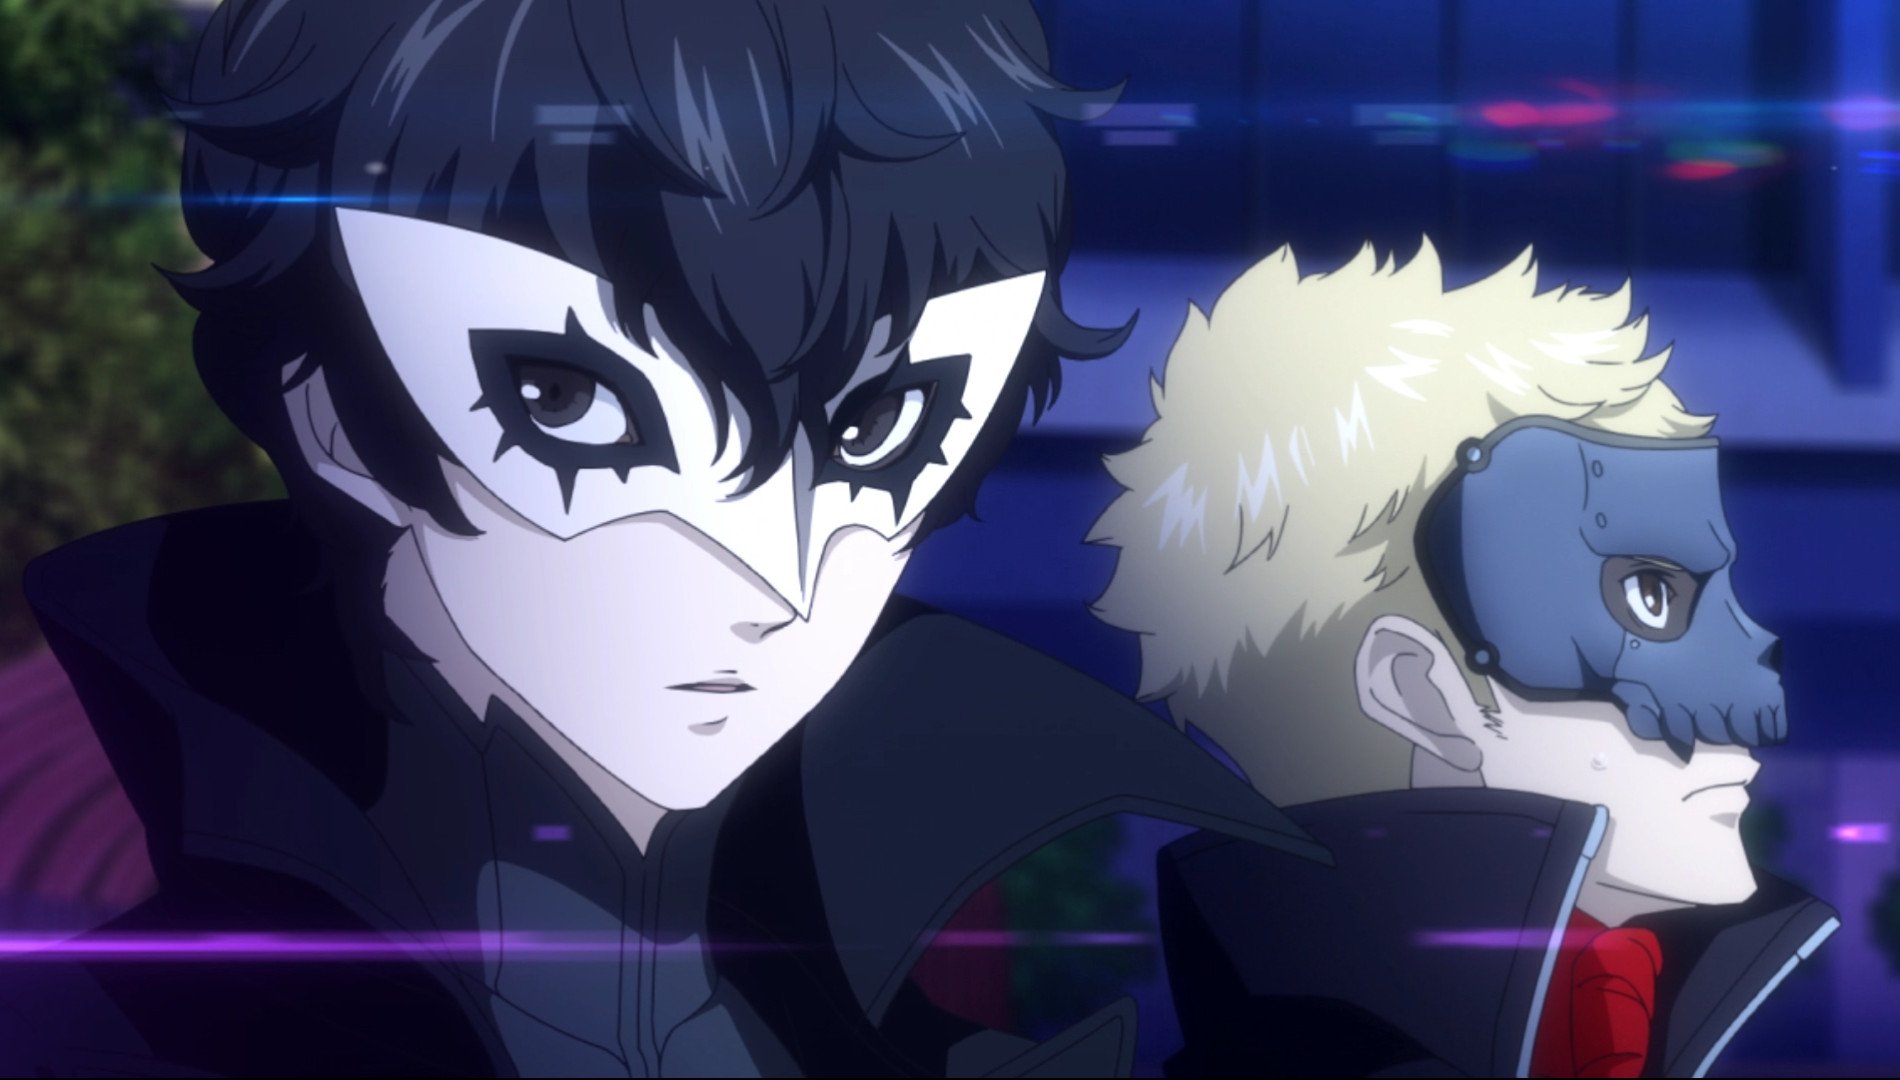 Persona 5 Strikers preview: A thrilling new adventure for even new fans |  Windows Central